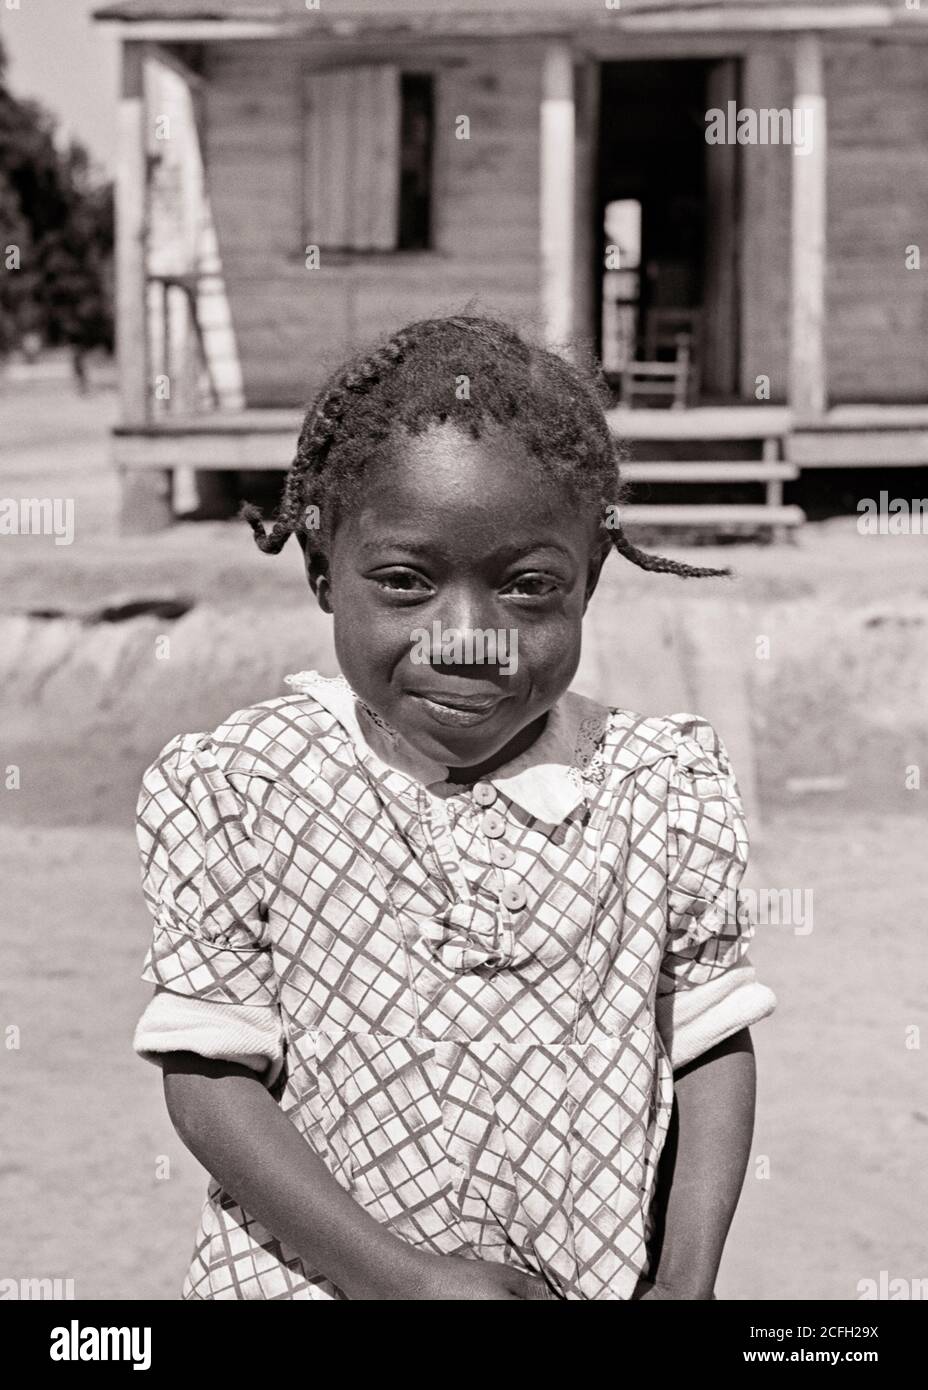 1930s SHY SMILING AFRICAN-AMERICAN LITTLE GIRL LOOKING AT CAMERA STANDING IN FRONT OF ROUGH RURAL CABIN HOME SOUTH CAROLINA USA - n1736 HAR001 HARS HOME LIFE UNITED STATES COPY SPACE HALF-LENGTH INSPIRATION UNITED STATES OF AMERICA CABIN ROUGH B&W NORTH AMERICA EYE CONTACT NORTH AMERICAN HAPPINESS WELLNESS CHEERFUL AFRICAN-AMERICANS AFRICAN-AMERICAN BLACK ETHNICITY PRIDE IN OF SMILES CONCEPTUAL JOYFUL SHY STYLISH DISADVANTAGED GROWTH JUVENILES SC SOUTH CAROLINA BLACK AND WHITE ERA HAR001 OLD FASHIONED AFRICAN AMERICANS Stock Photo